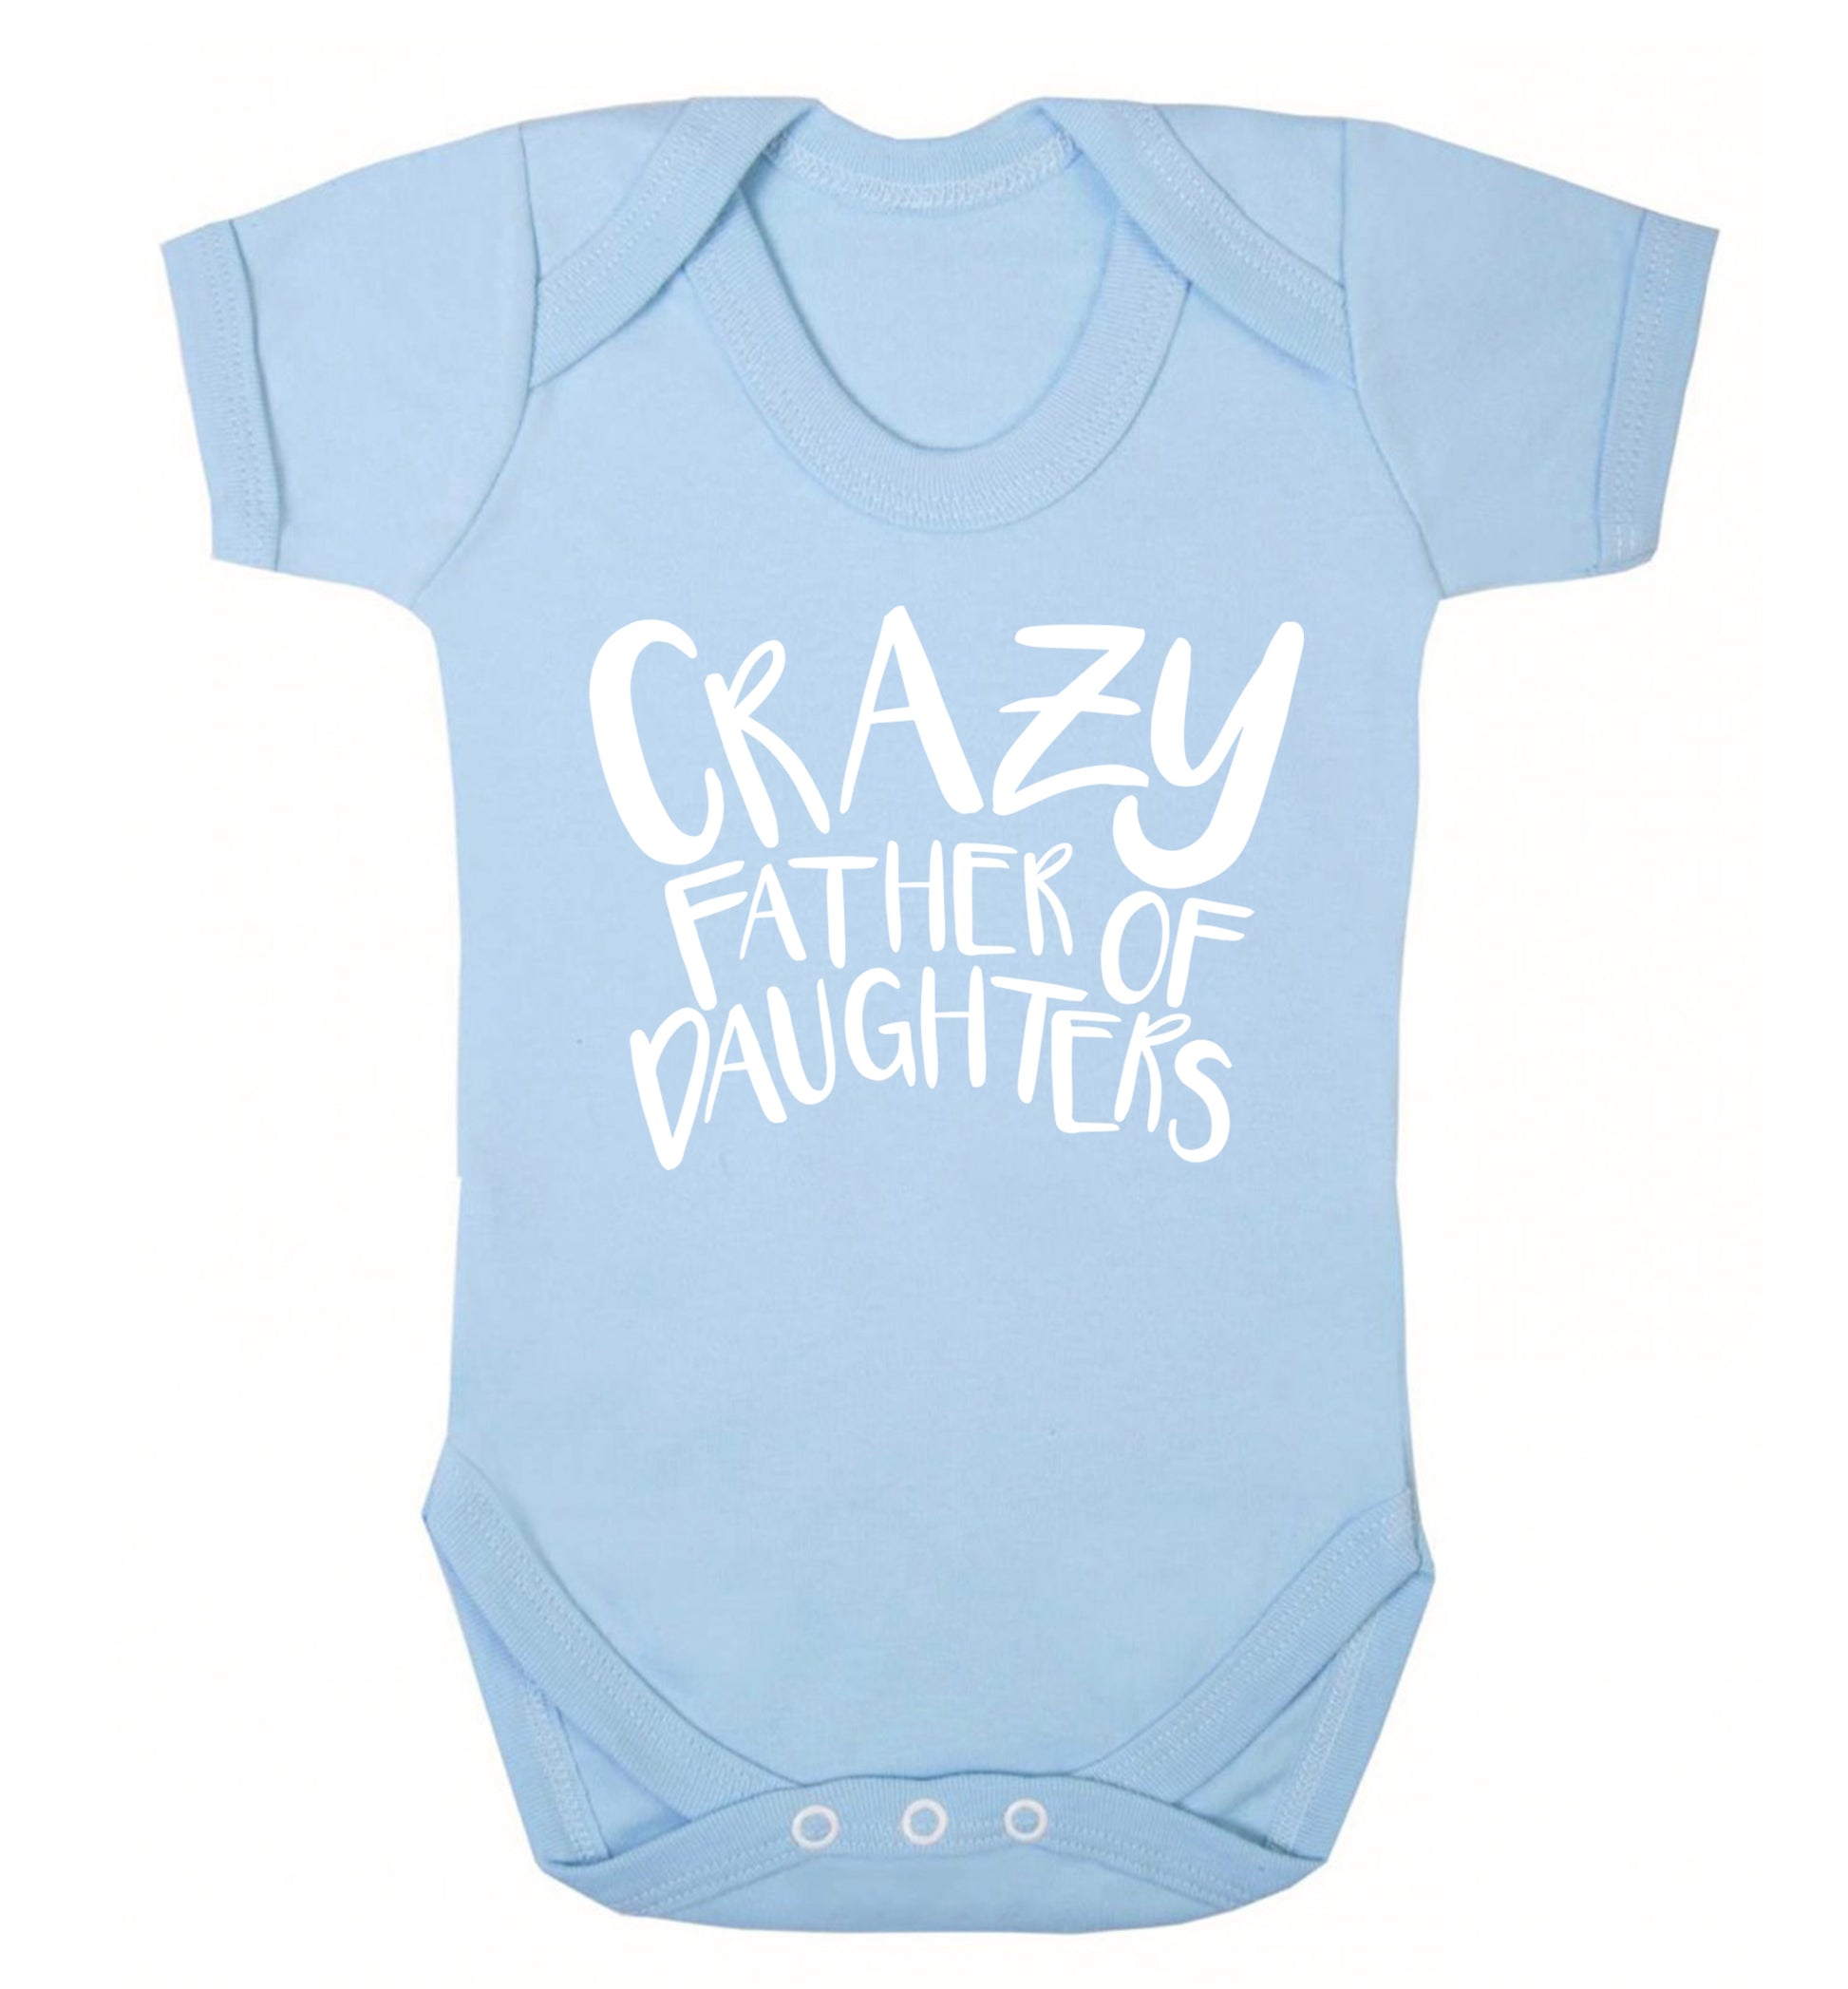 Crazy father of daughters Baby Vest pale blue 18-24 months